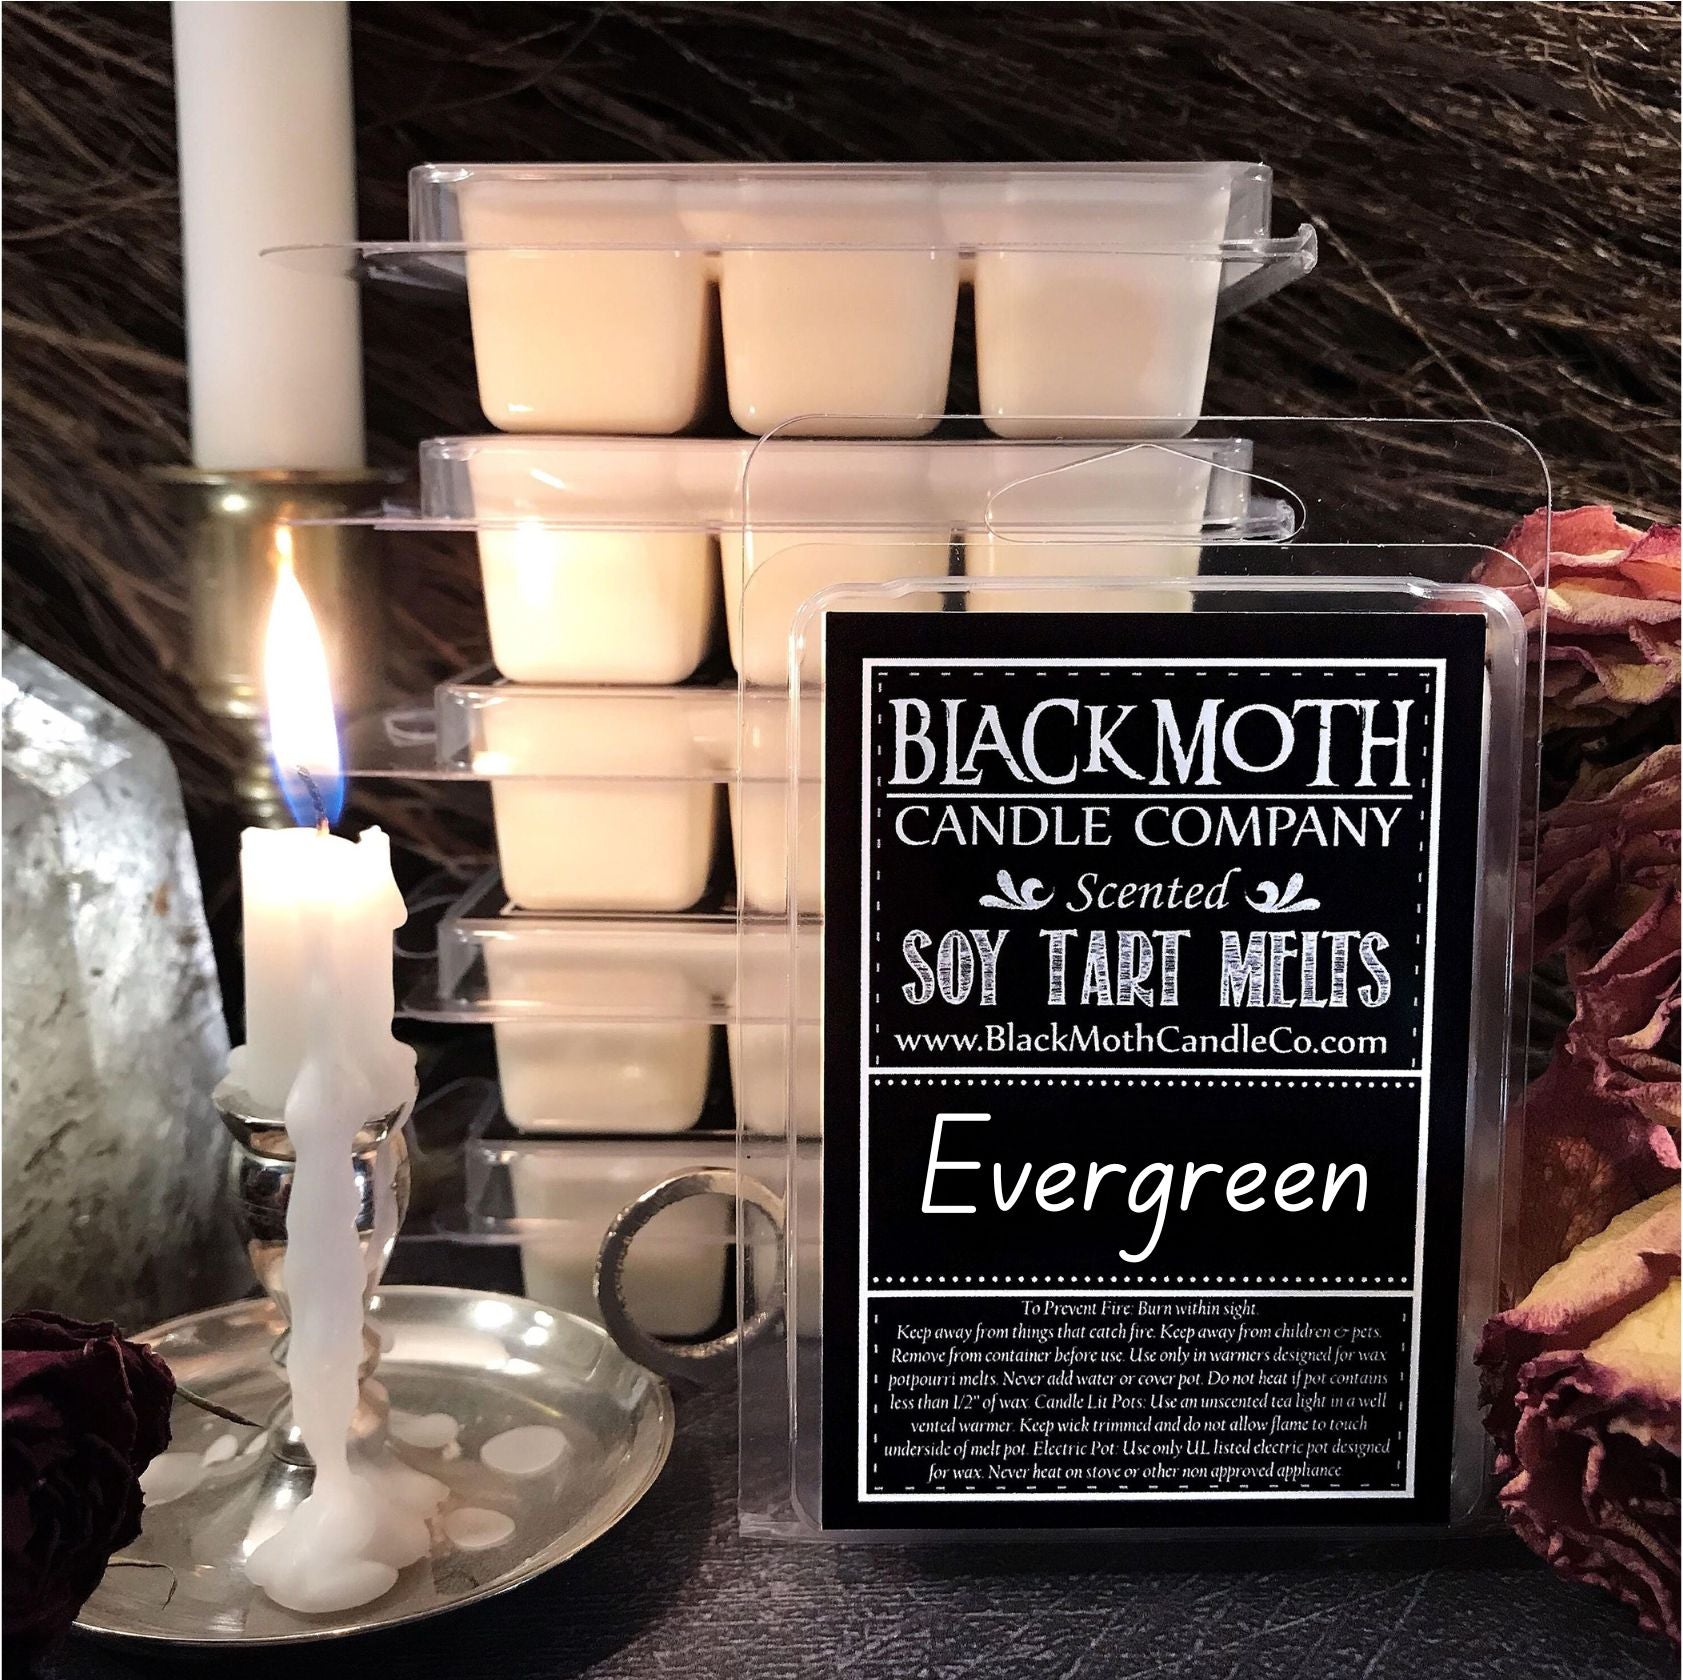 Evergreen Scented Soy Wax Melts